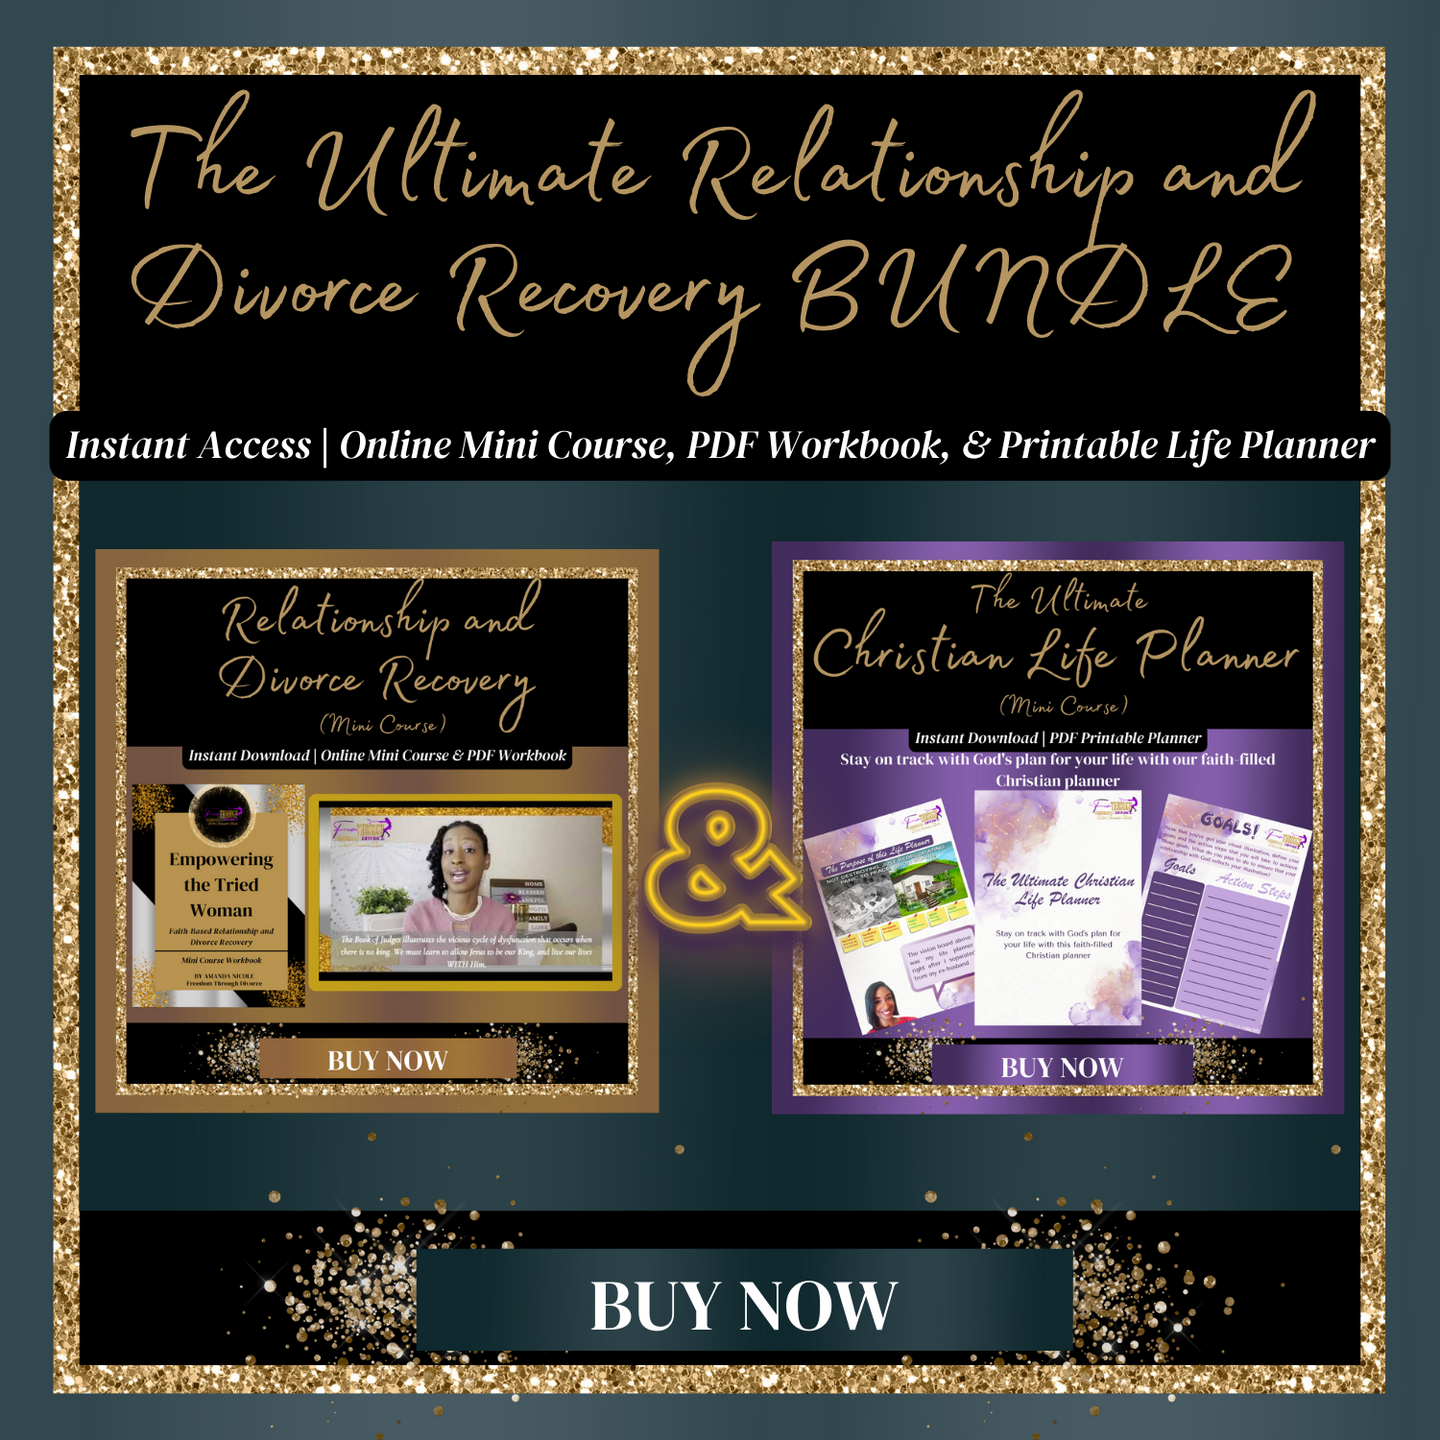 The Ultimate Relationship and Divorce Recovery BUNDLE